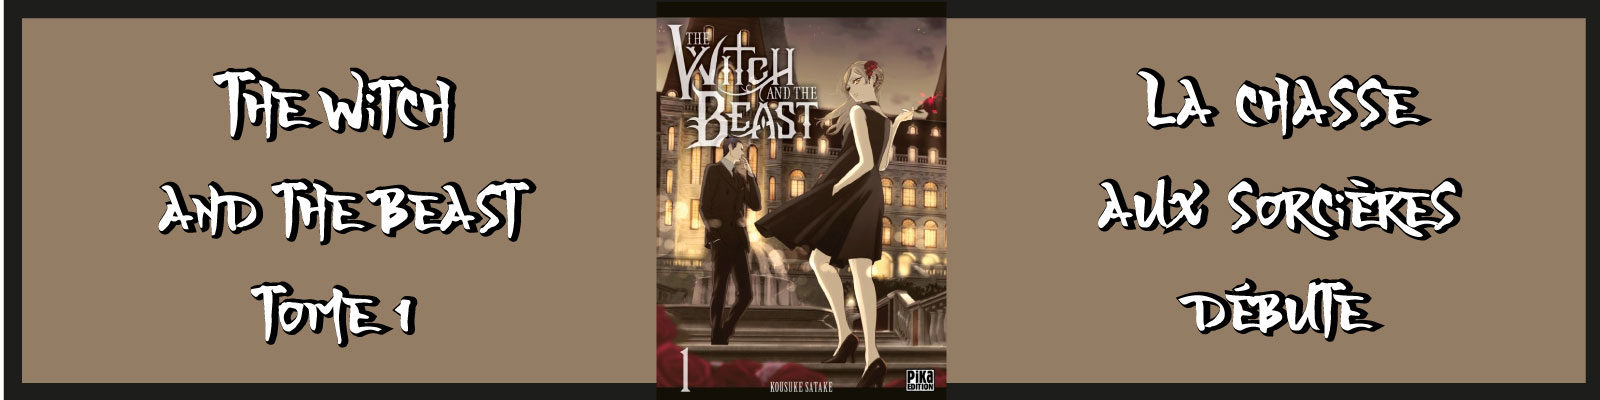 The Witch and the Beast-Vol.-1